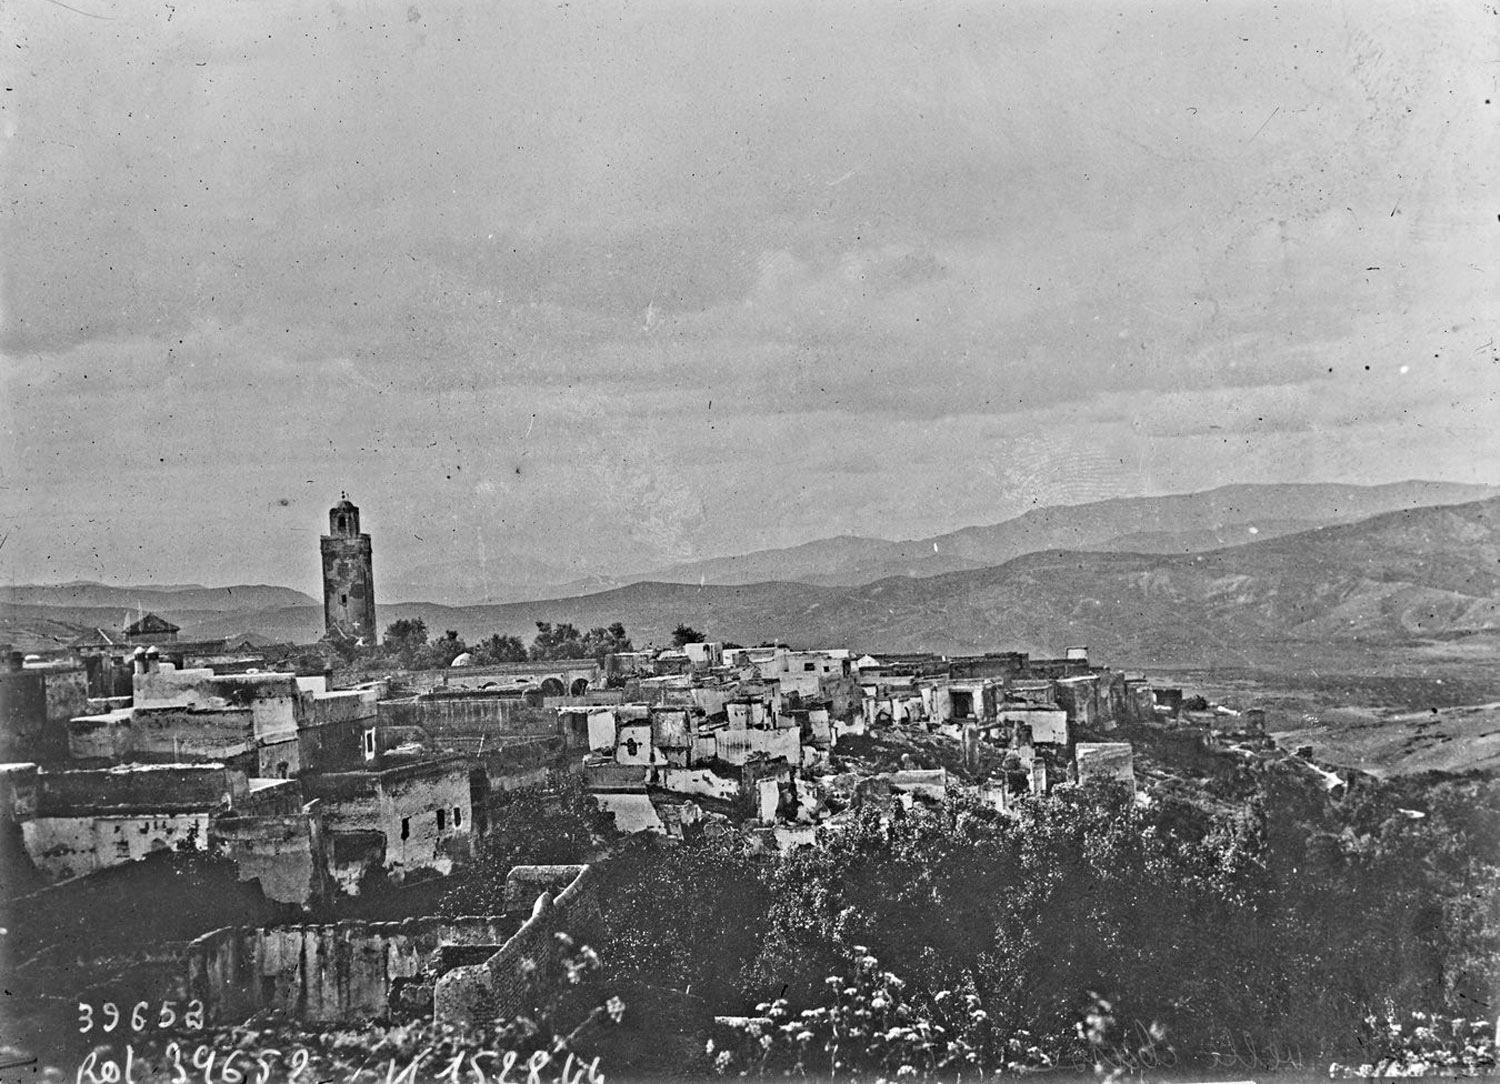 Aerial view of the town with the minaret of the Great Mosque